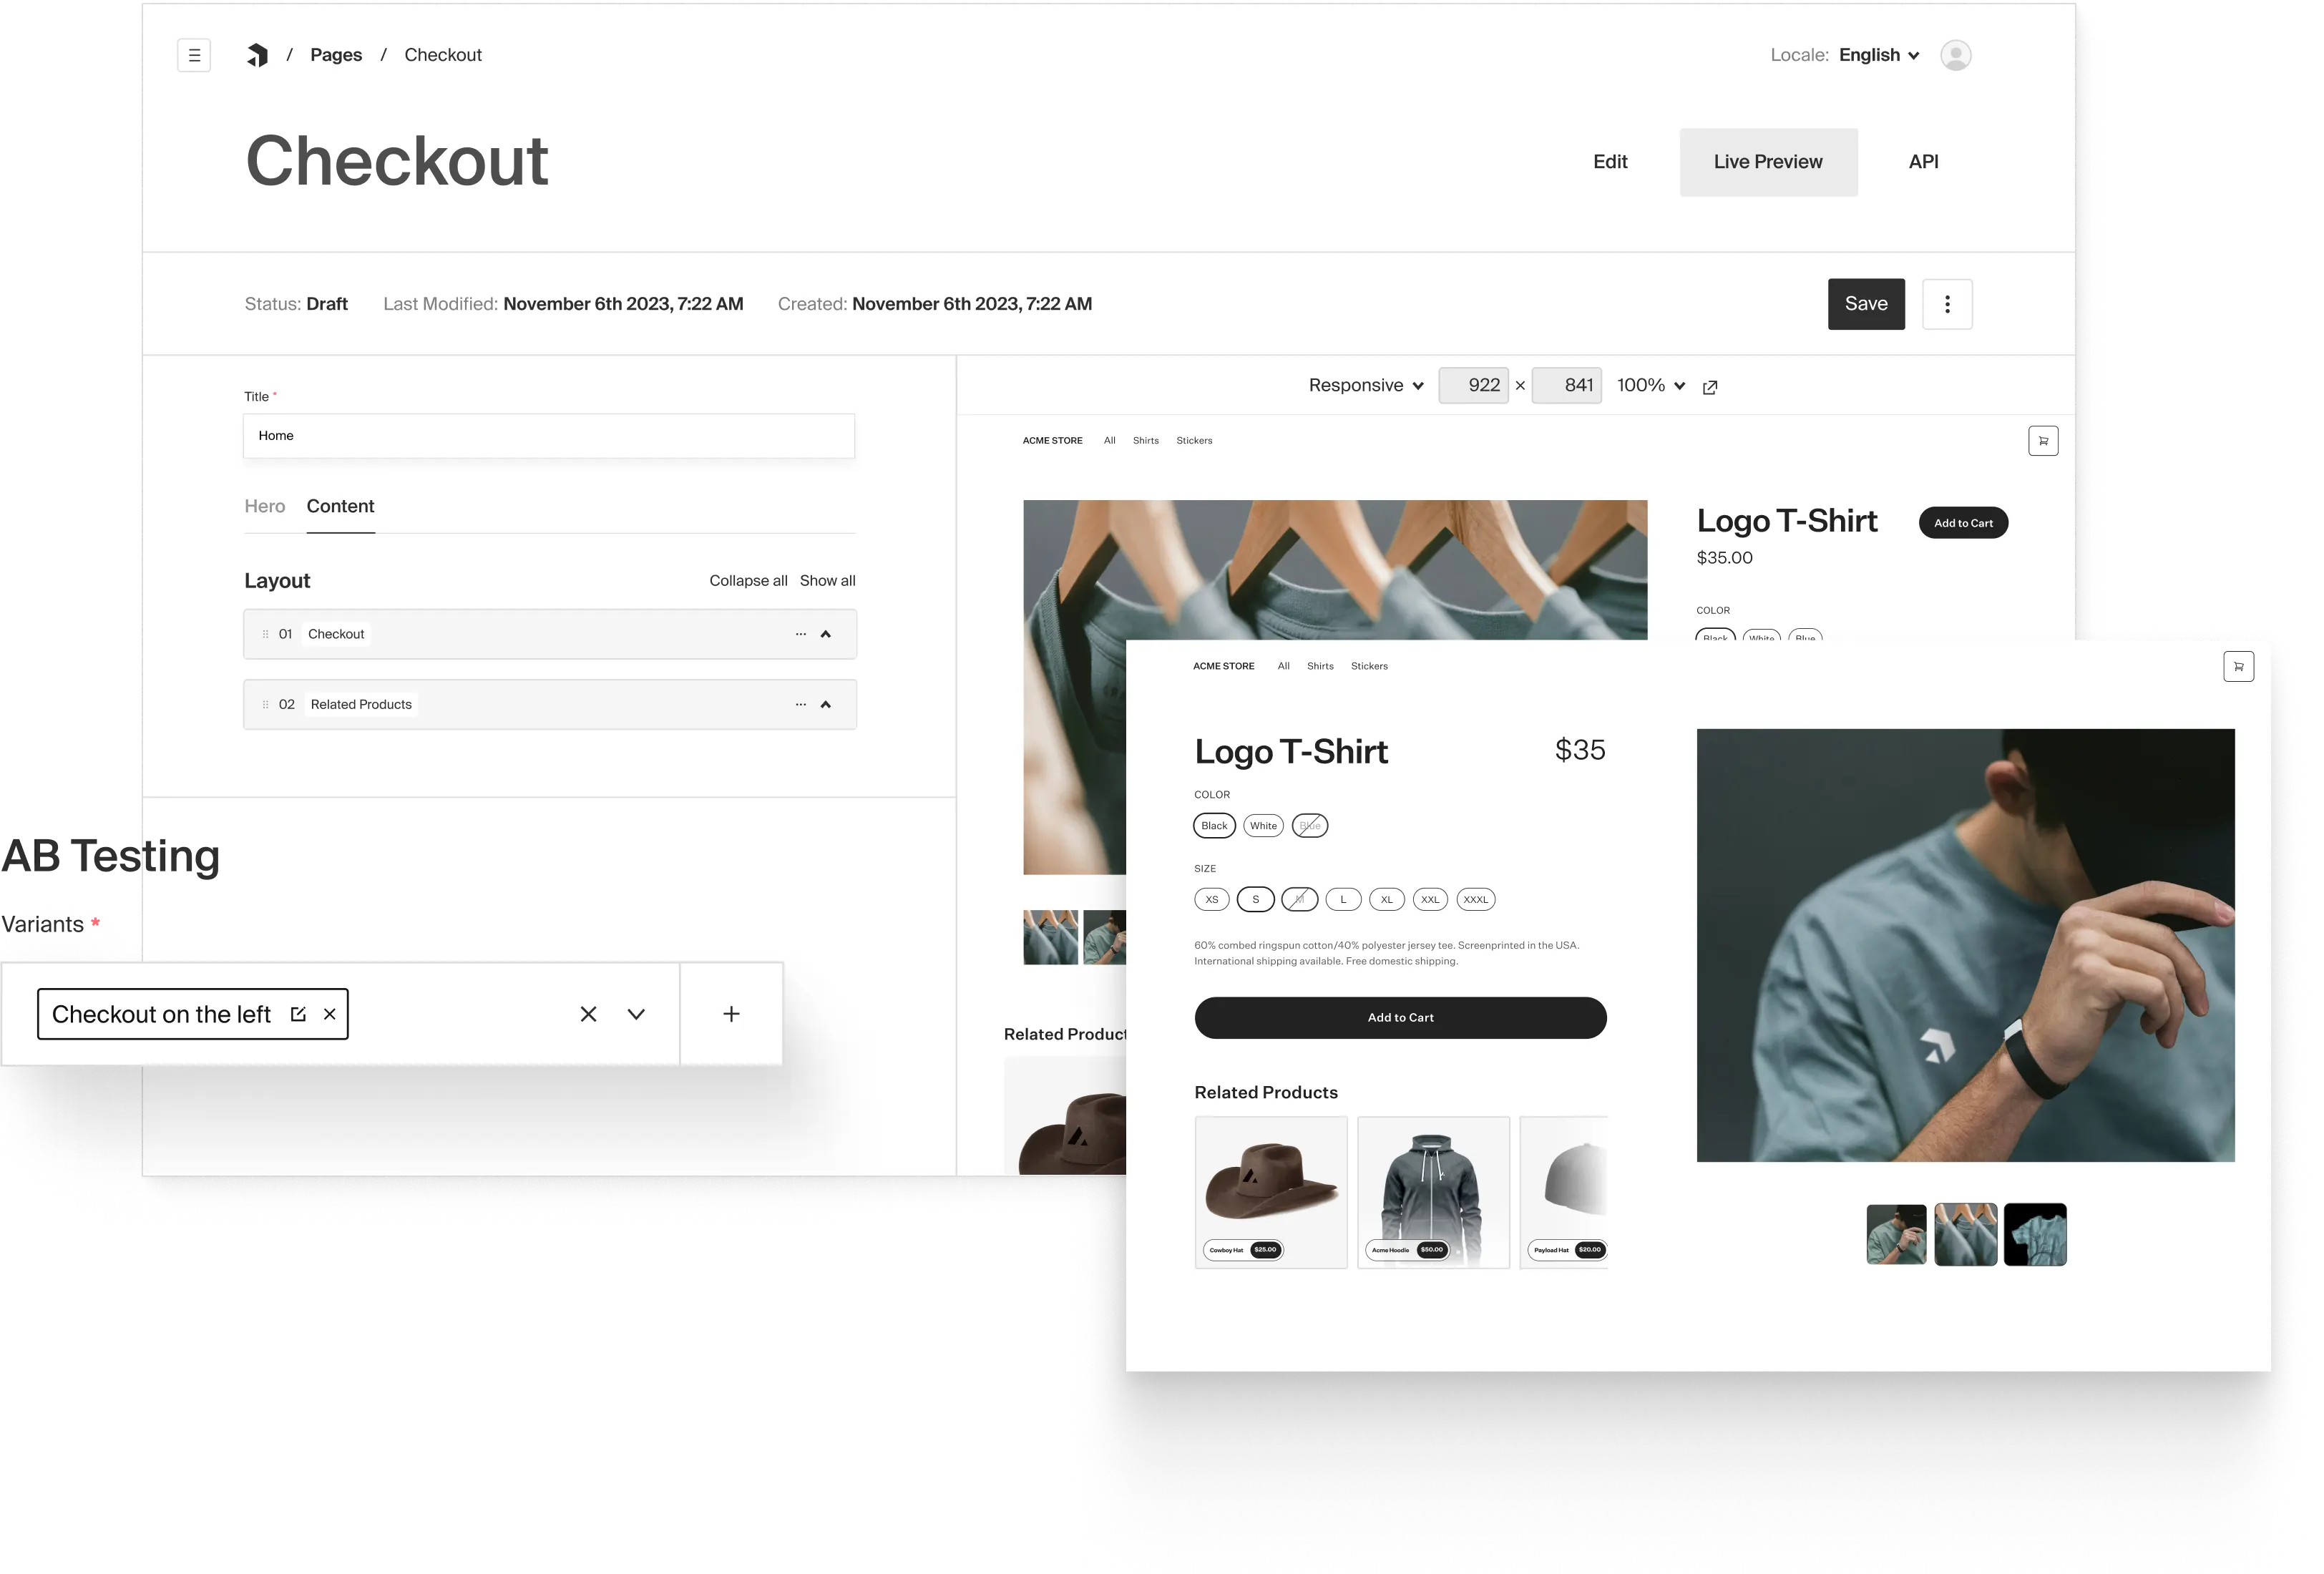 AB Testing a storefront variant with the checkout on the right, and one with the checkout on the left